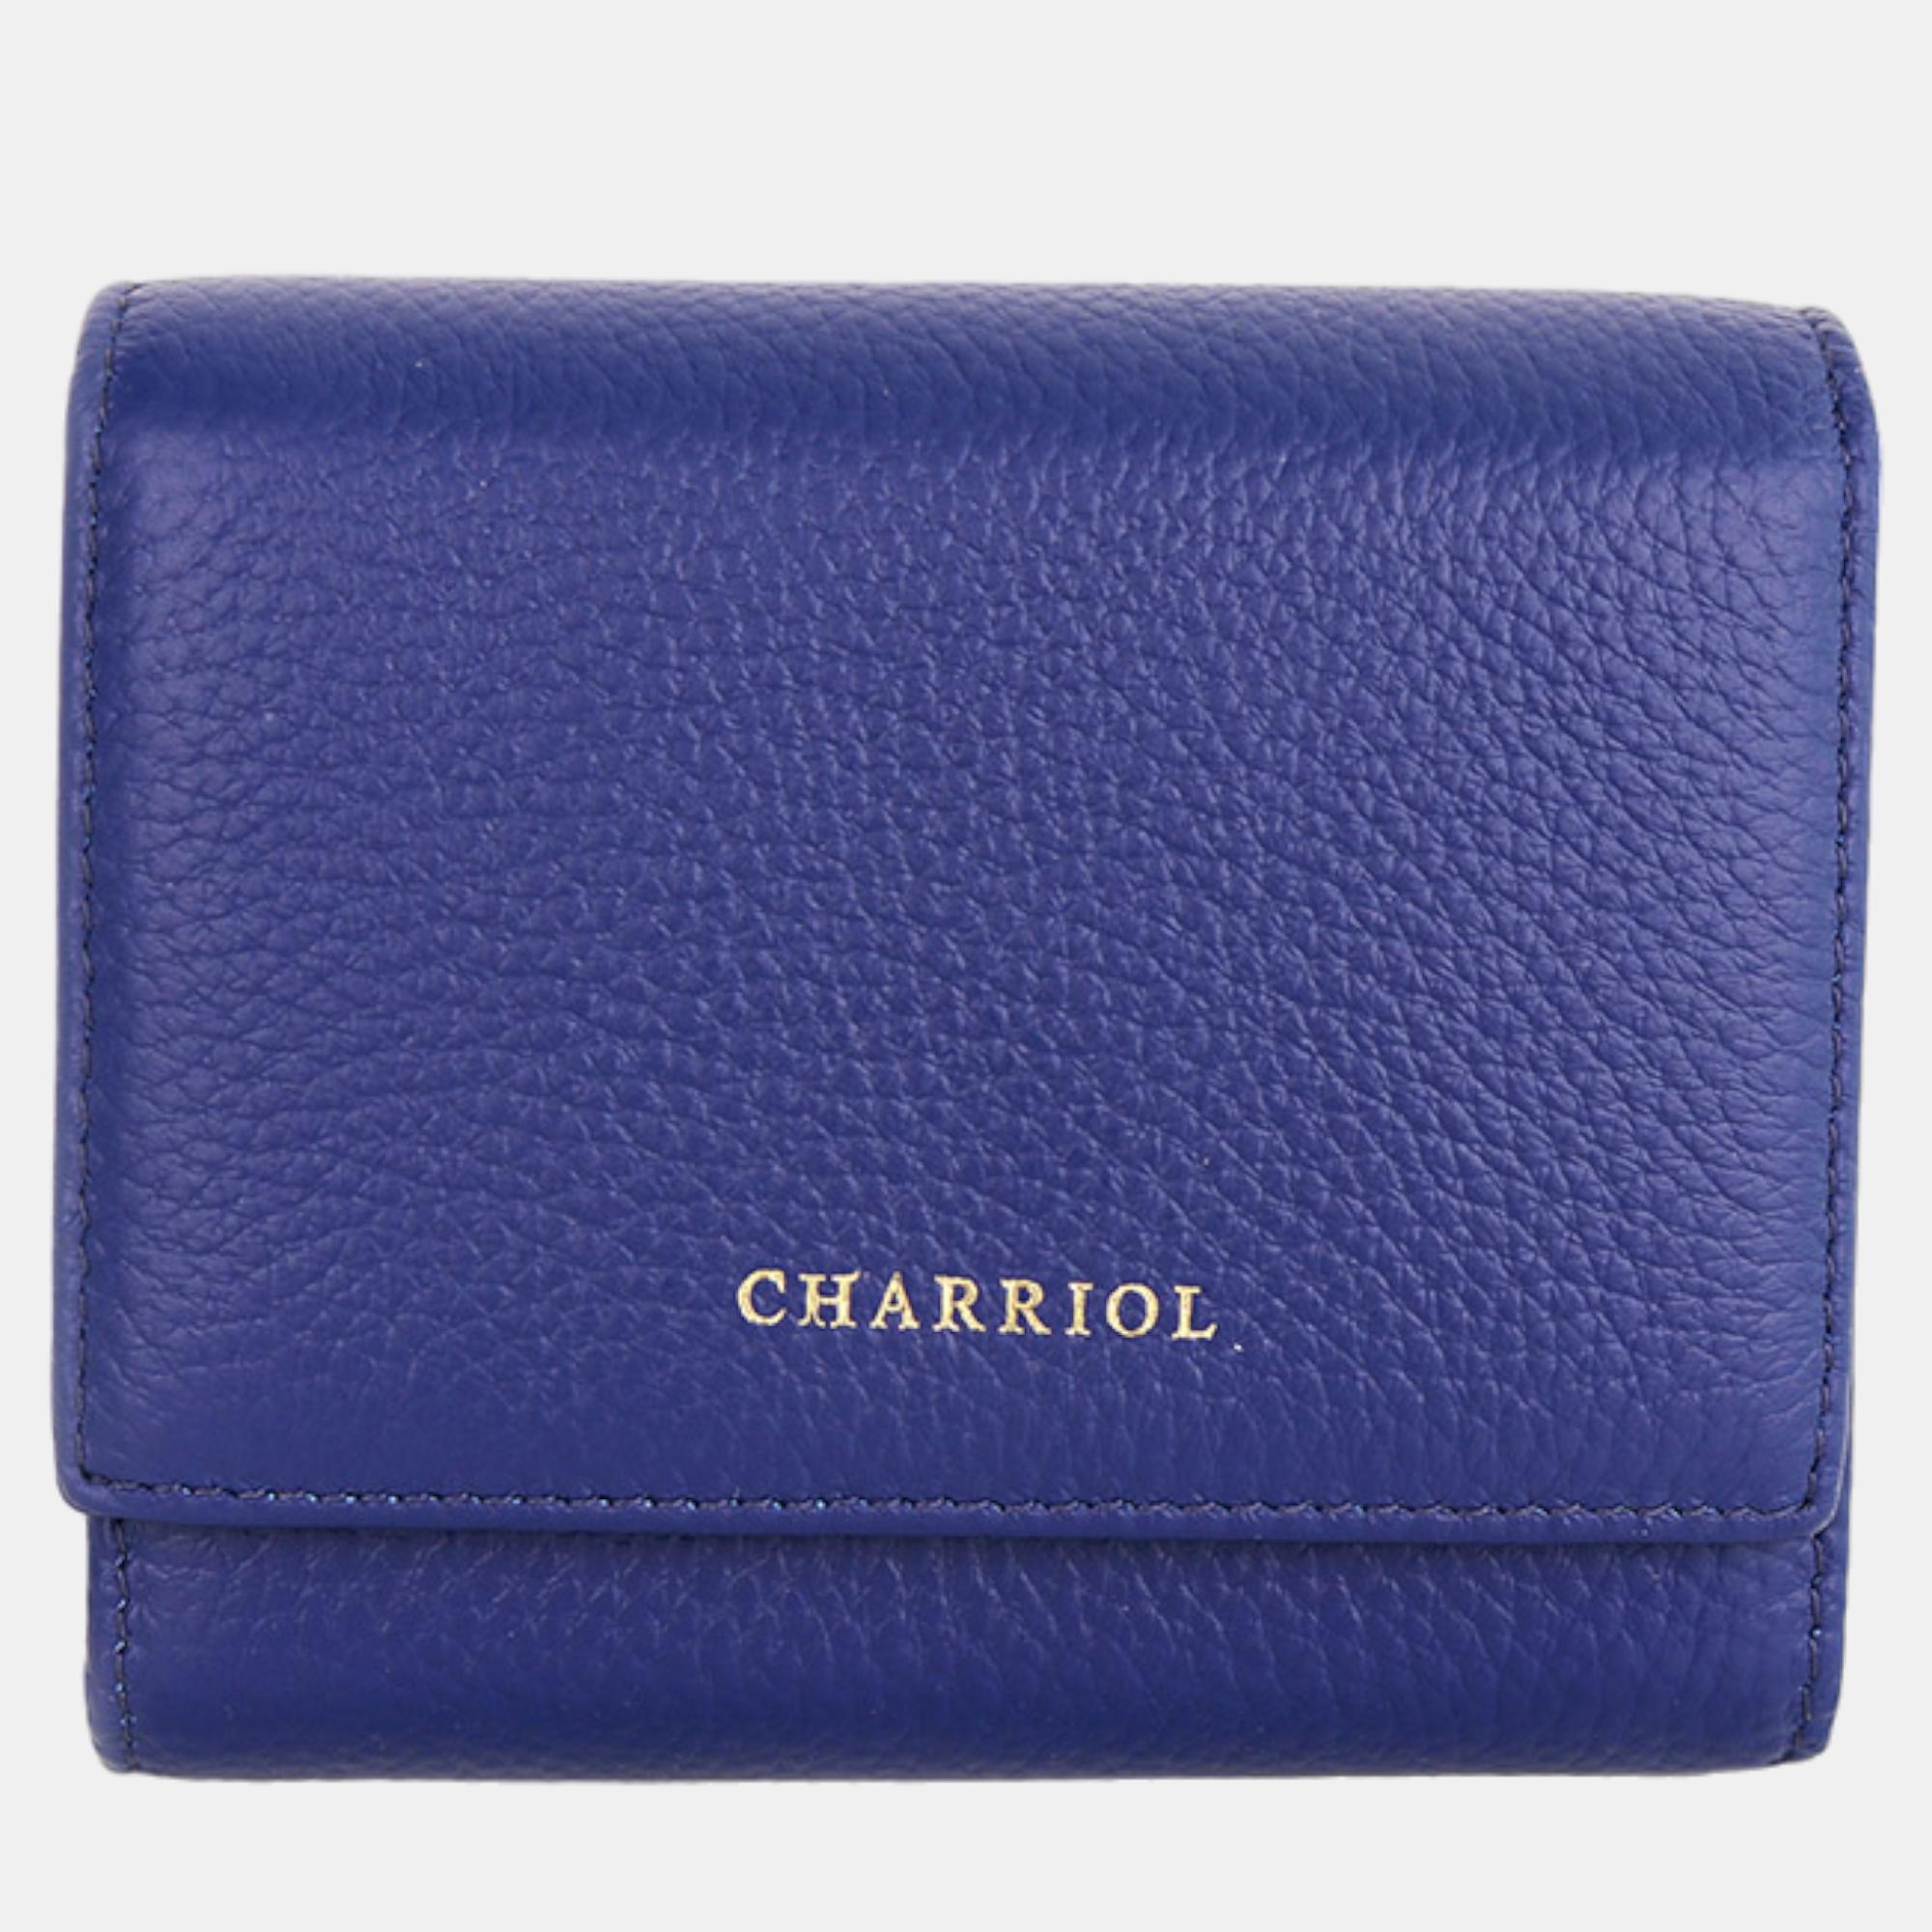 Pre-owned Charriol Navy Blue Leather Wallet